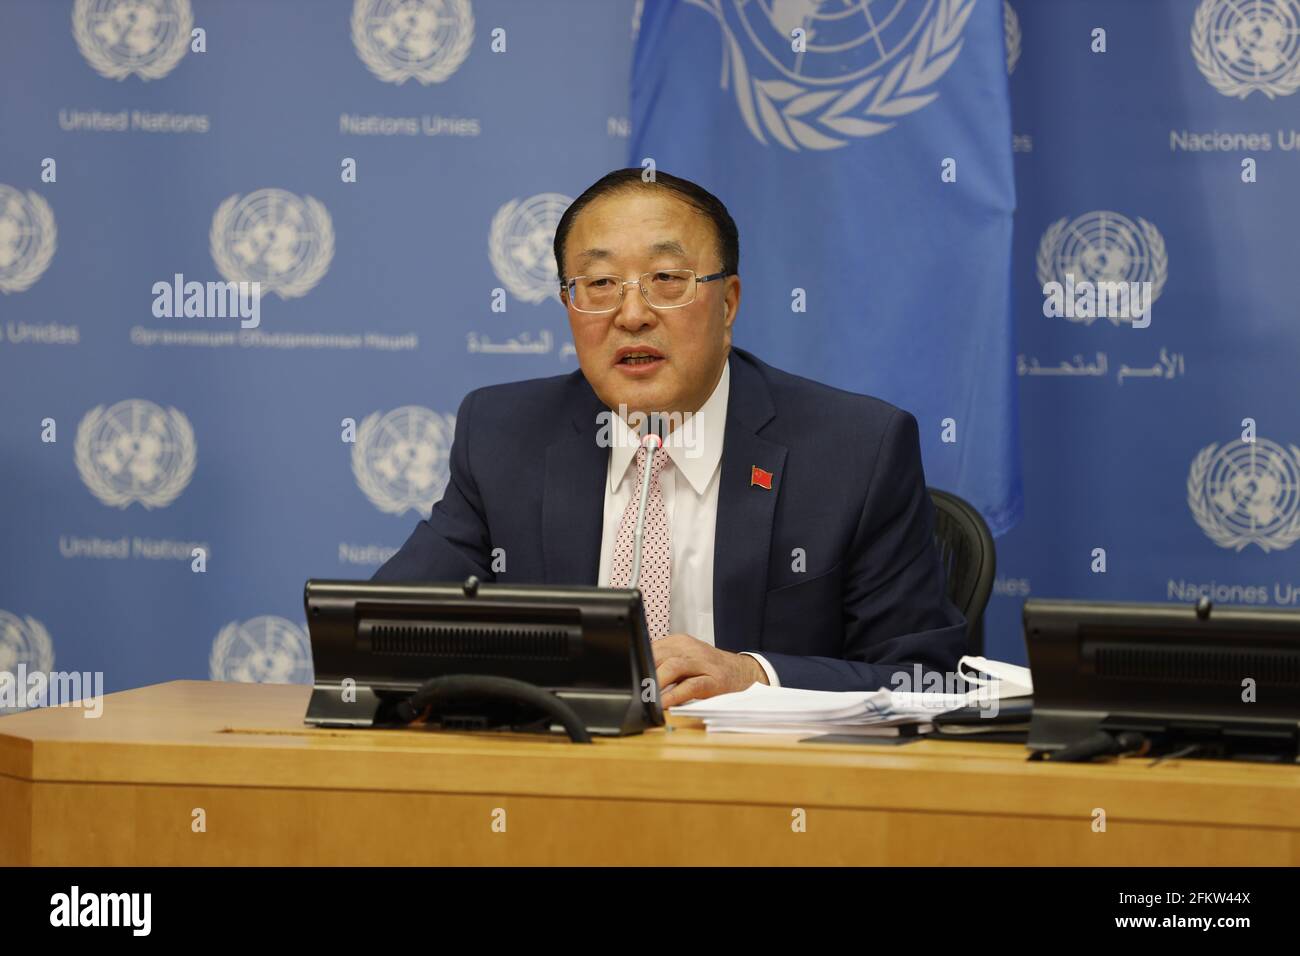 (210504) -- UNITED NATIONS, May 4, 2021 (Xinhua) -- Chinese Ambassador to the United Nations (UN) Zhang Jun speaks during a press conference at the UN headquarters in New York, the United States, May 3, 2021. Zhang Jun, who took the rotating presidency of the Security Council, on Monday underlined the importance of practicing true multilateralism. In his press conference on China's presidency for the month of May, Zhang told journalists that based on the Council's agenda, China will take the following as priorities in the work of the Security Council, including firmly upholding and practicin Stock Photo